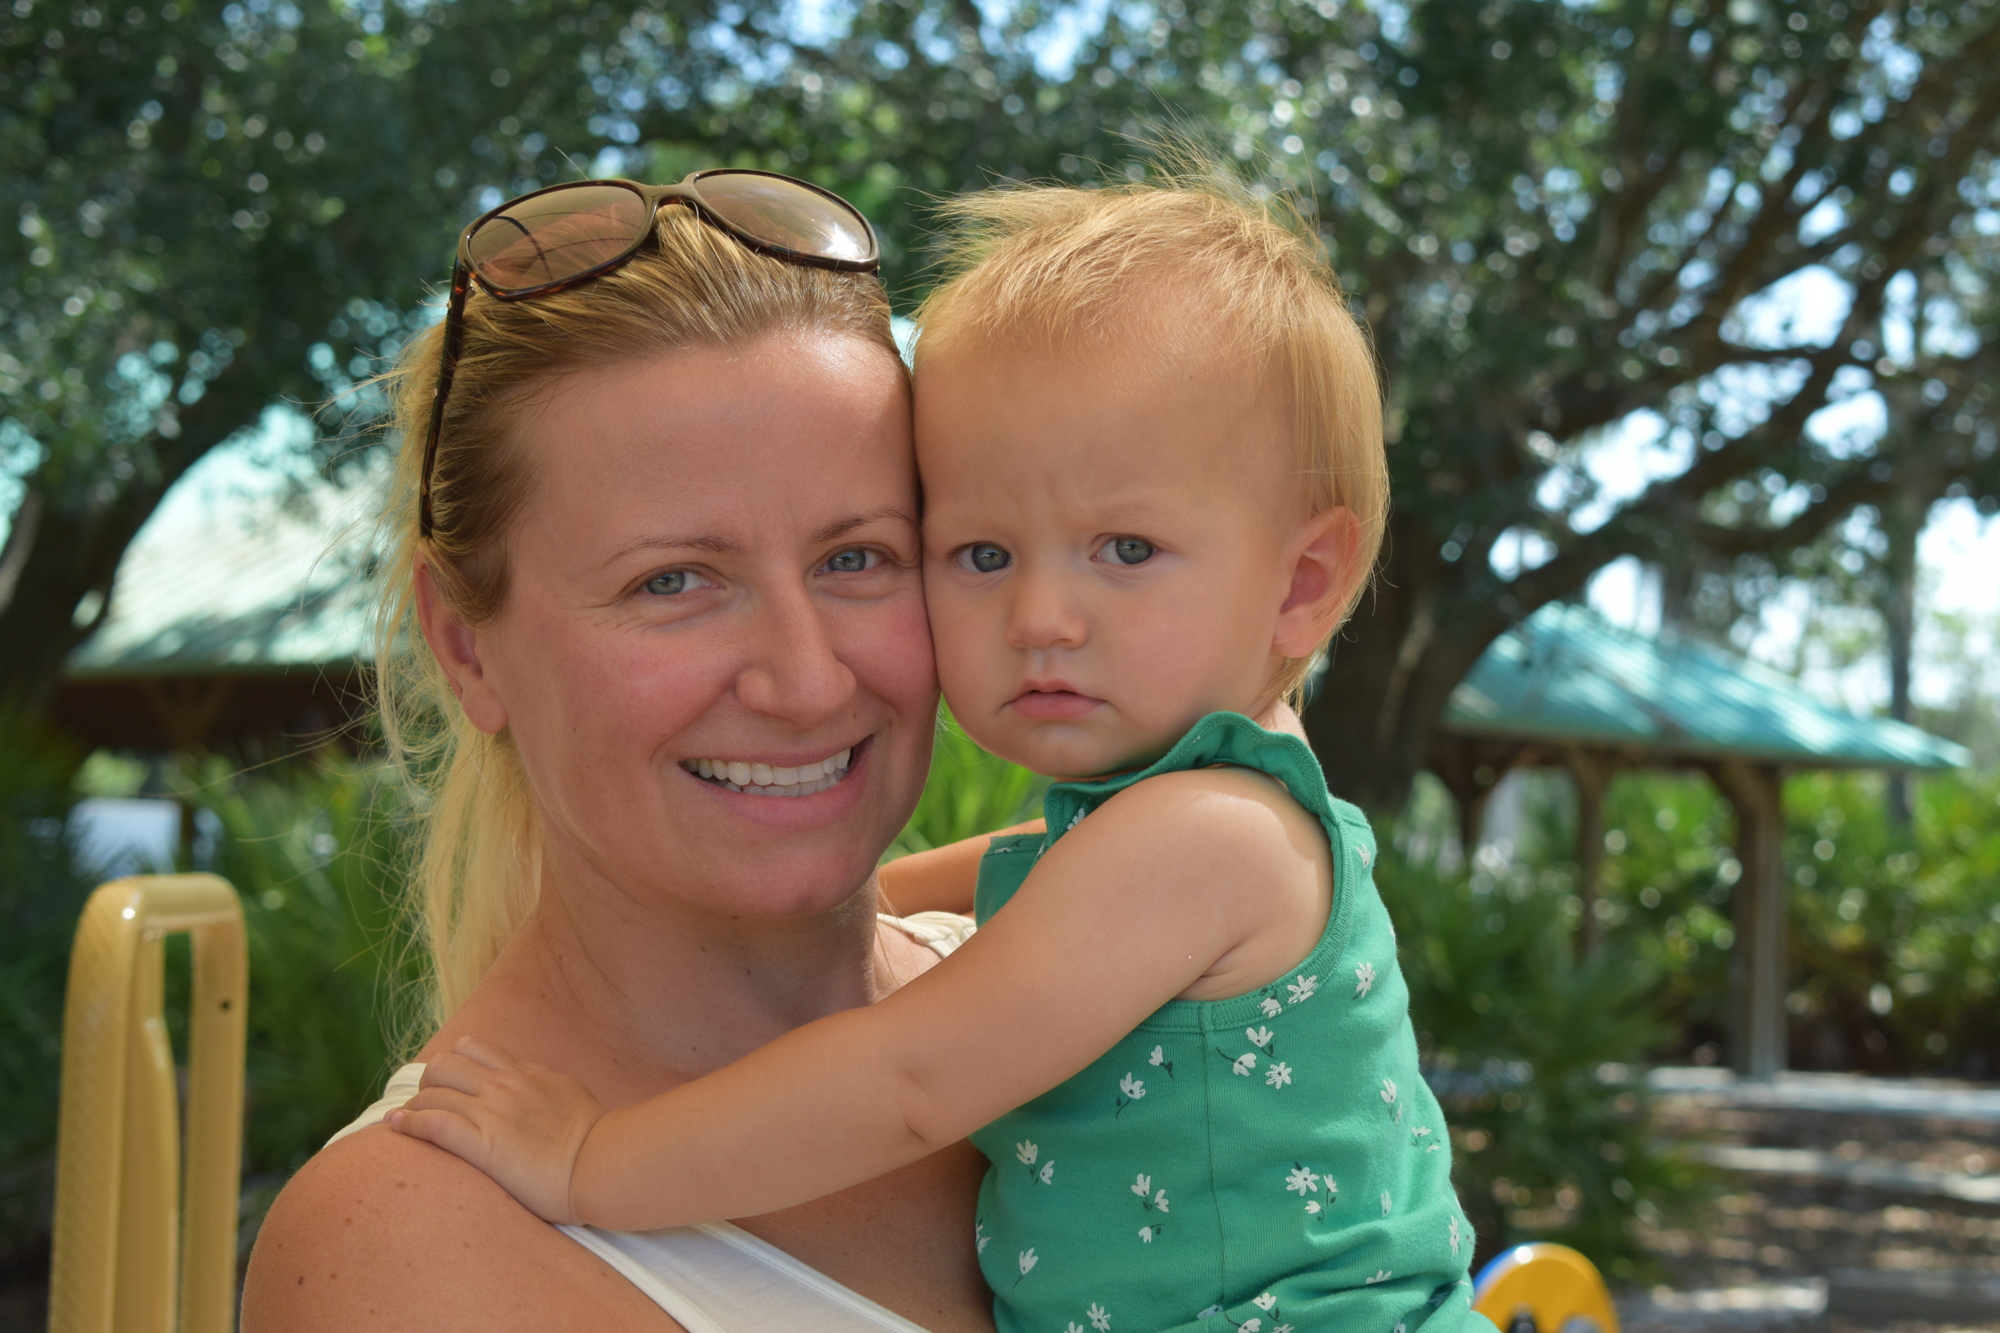 Lakewood Ranch's Margaret Salza says although the pandemic has been hard because family couldn't visit, she's enjoyed spending time with her 20-month-old daughter Savana Salza.